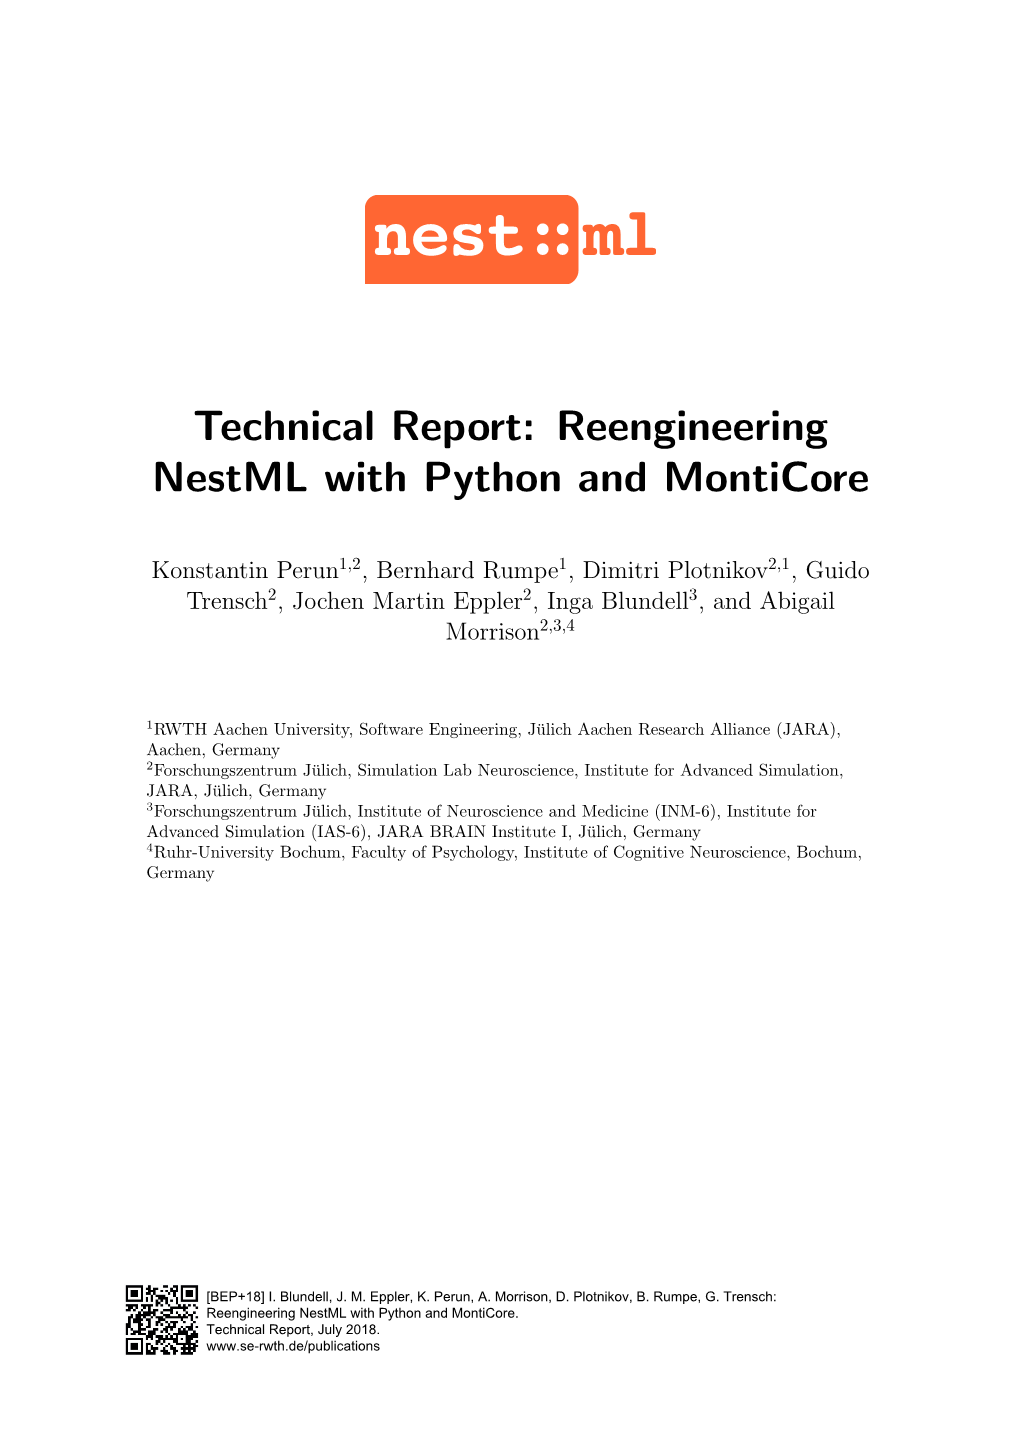 Technical Report: Reengineering Nestml with Python and Monticore